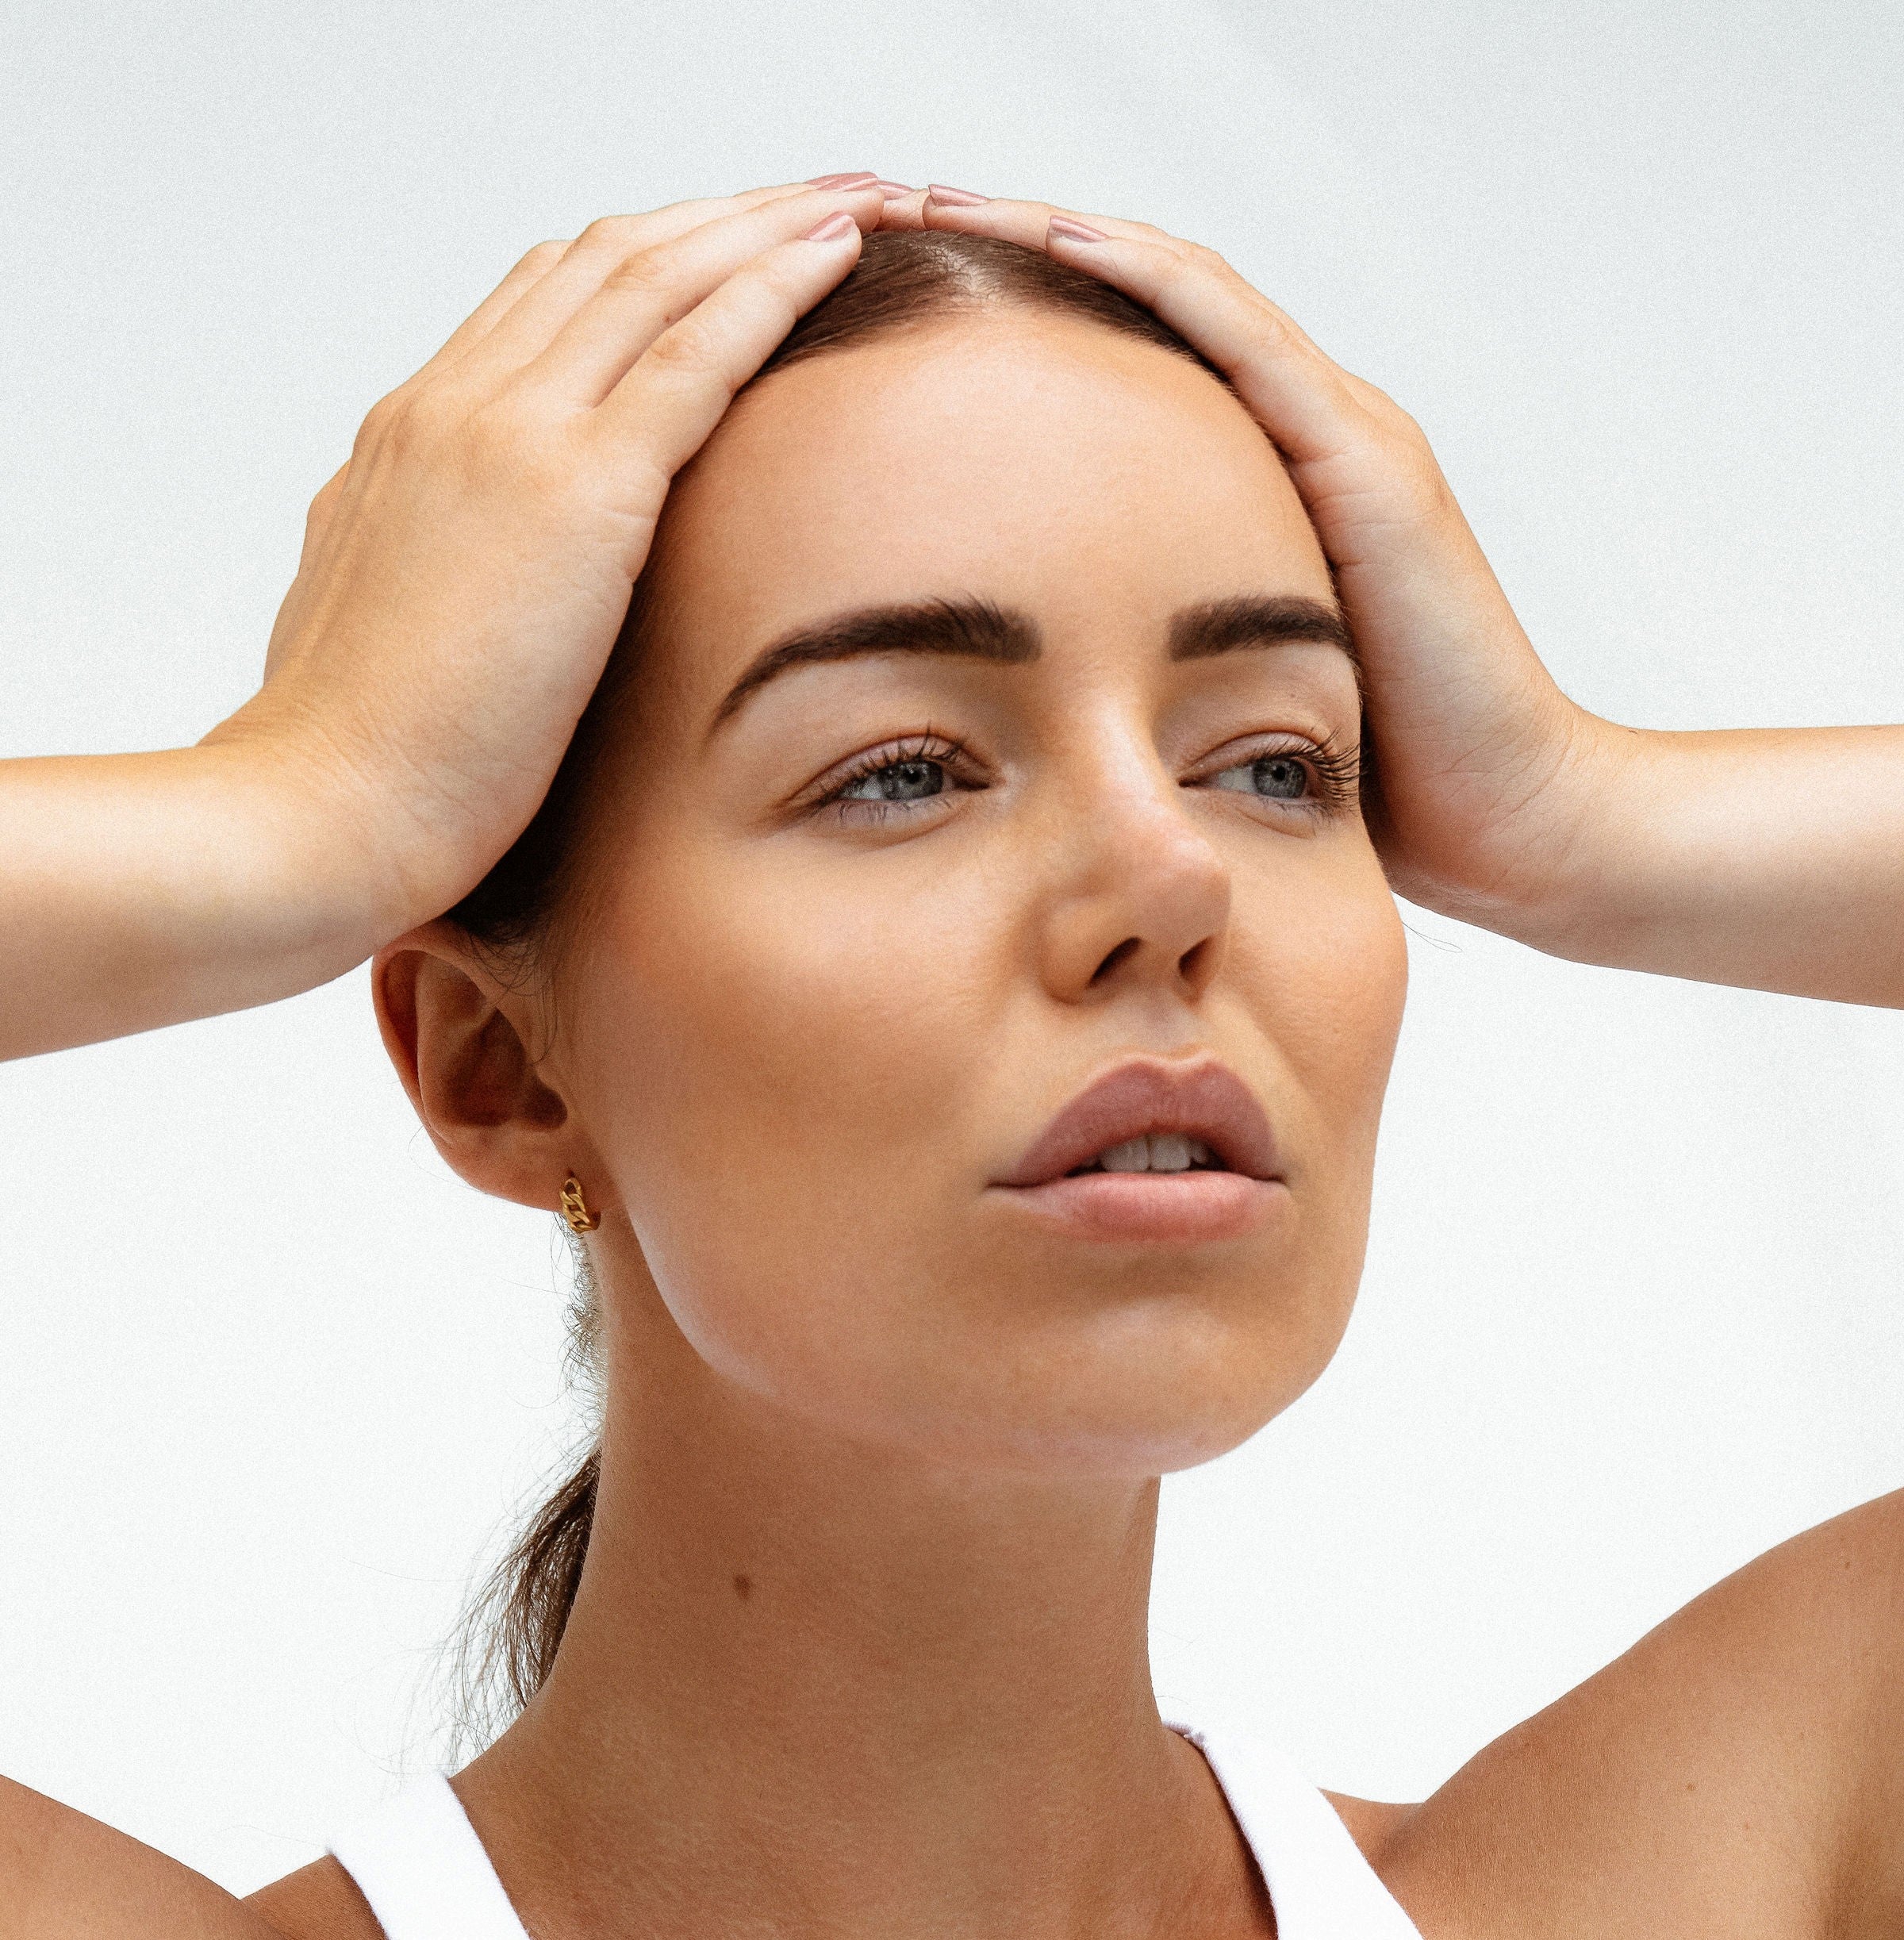 Everything you need to know about Hyaluronic Acid